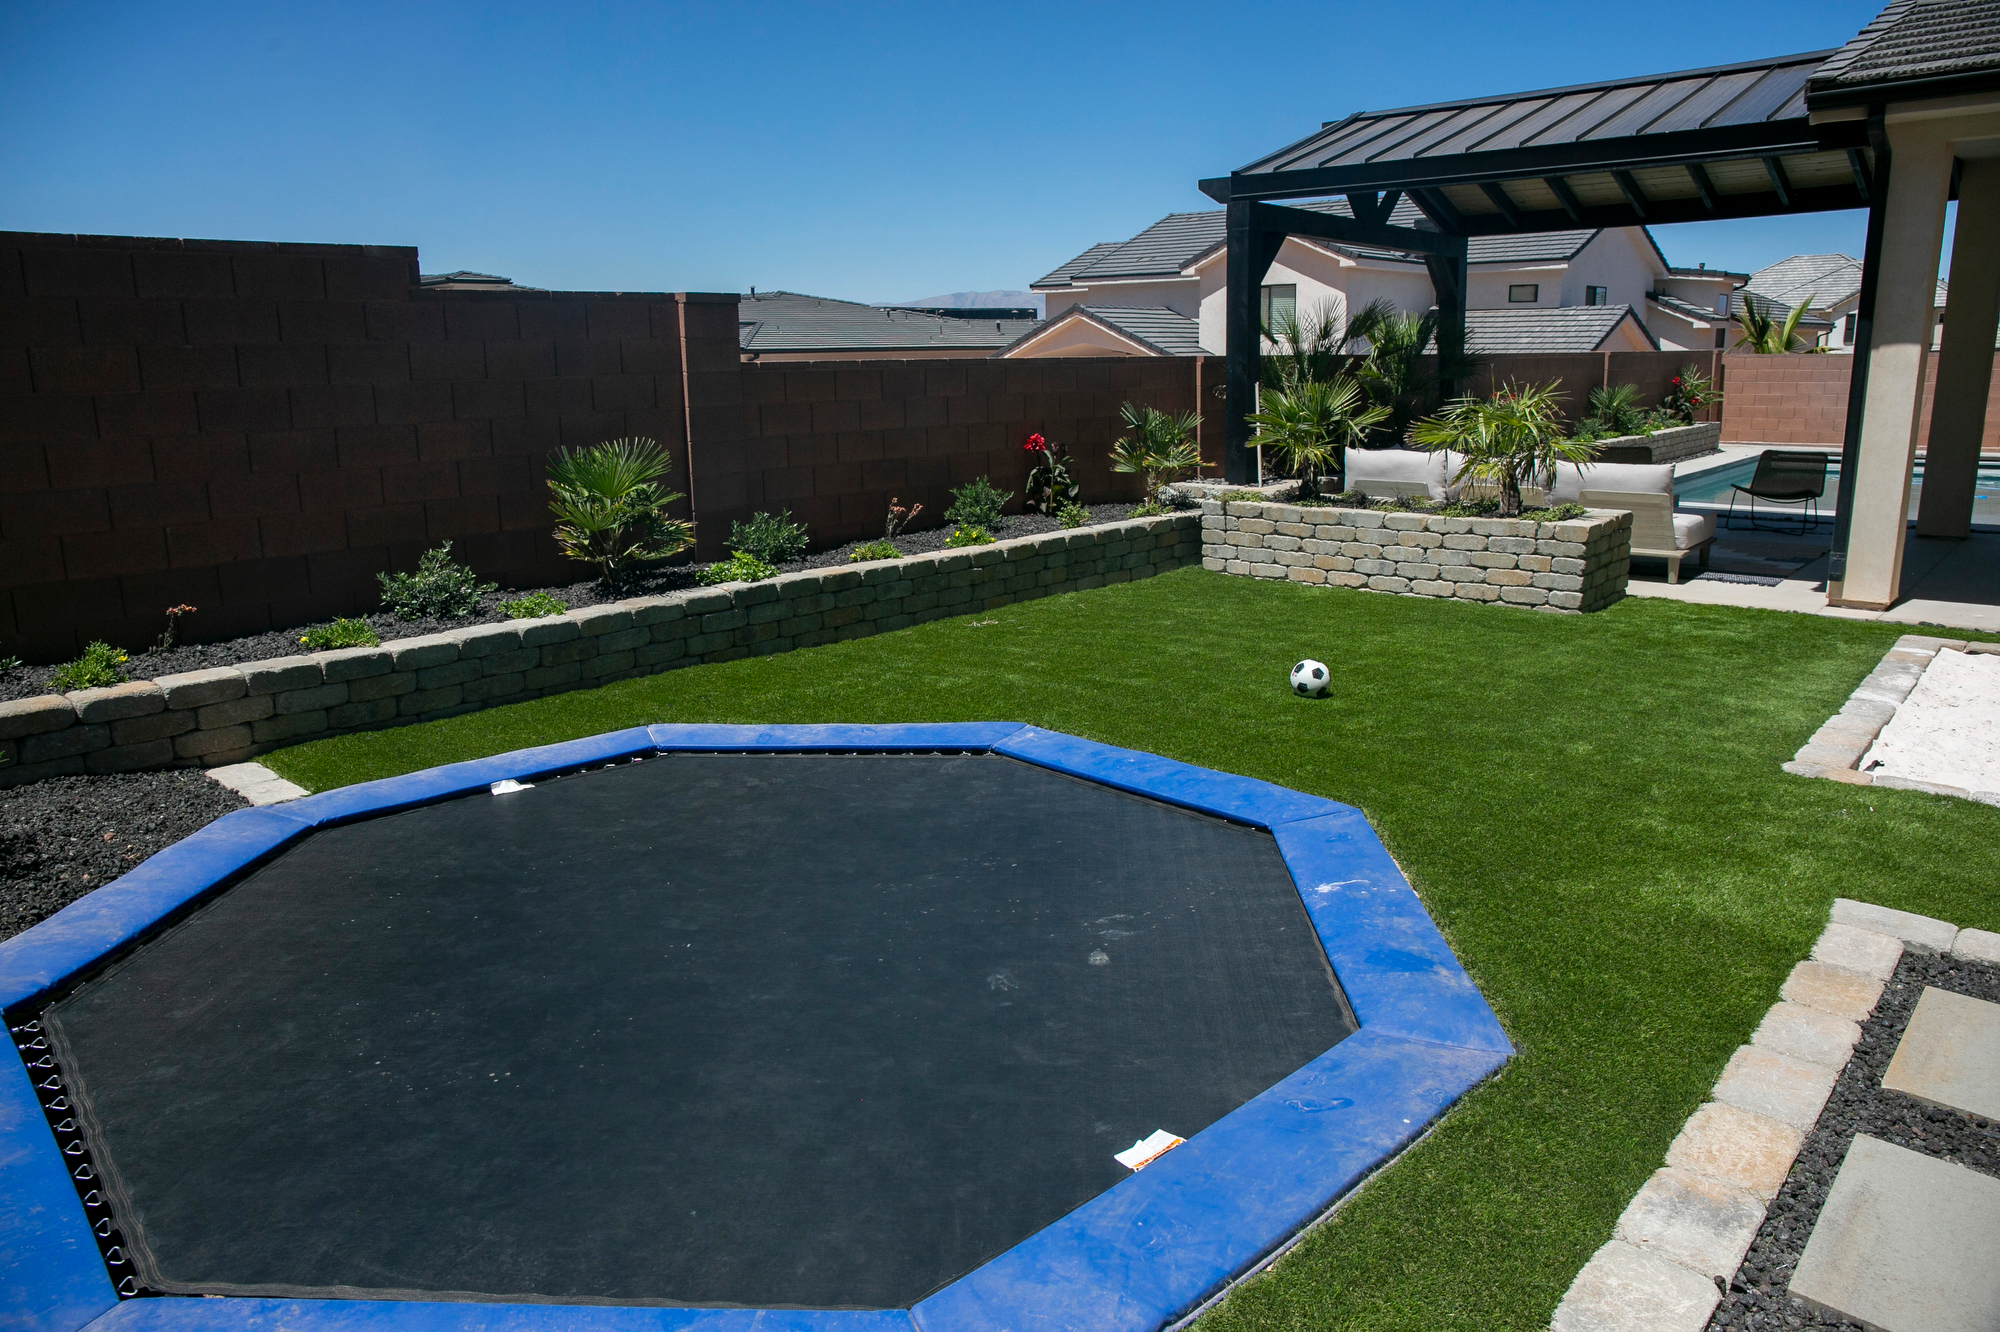 St. George synthetic turf rebates can help yiou install artificial grass like this for a fraction of the cost, anywhere in Washington County! We surrounded this newly installed pool with an amazing landscape that was complemented by a beautiful gazebo installed after our work was completed. The trampoline, artificial turf, and sand pit provide areas for the kids to play while the shade of the gazebo and the pool provide a place for grownups to relax and enjoy and evening with friends.